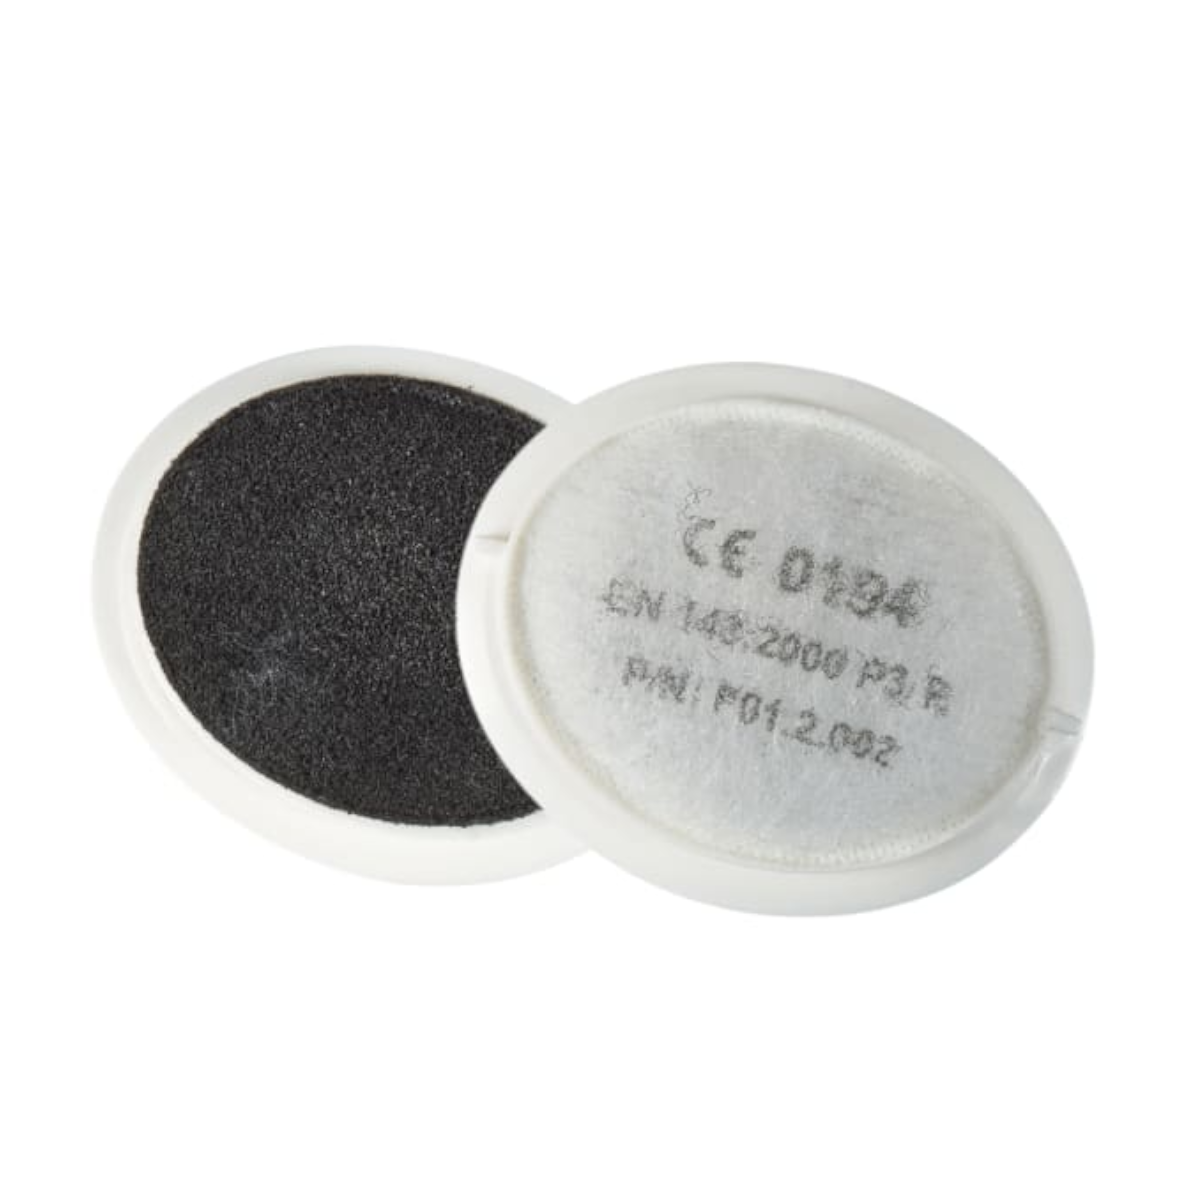 AIR Stealth P3 Filter 1 Off Pair Trend